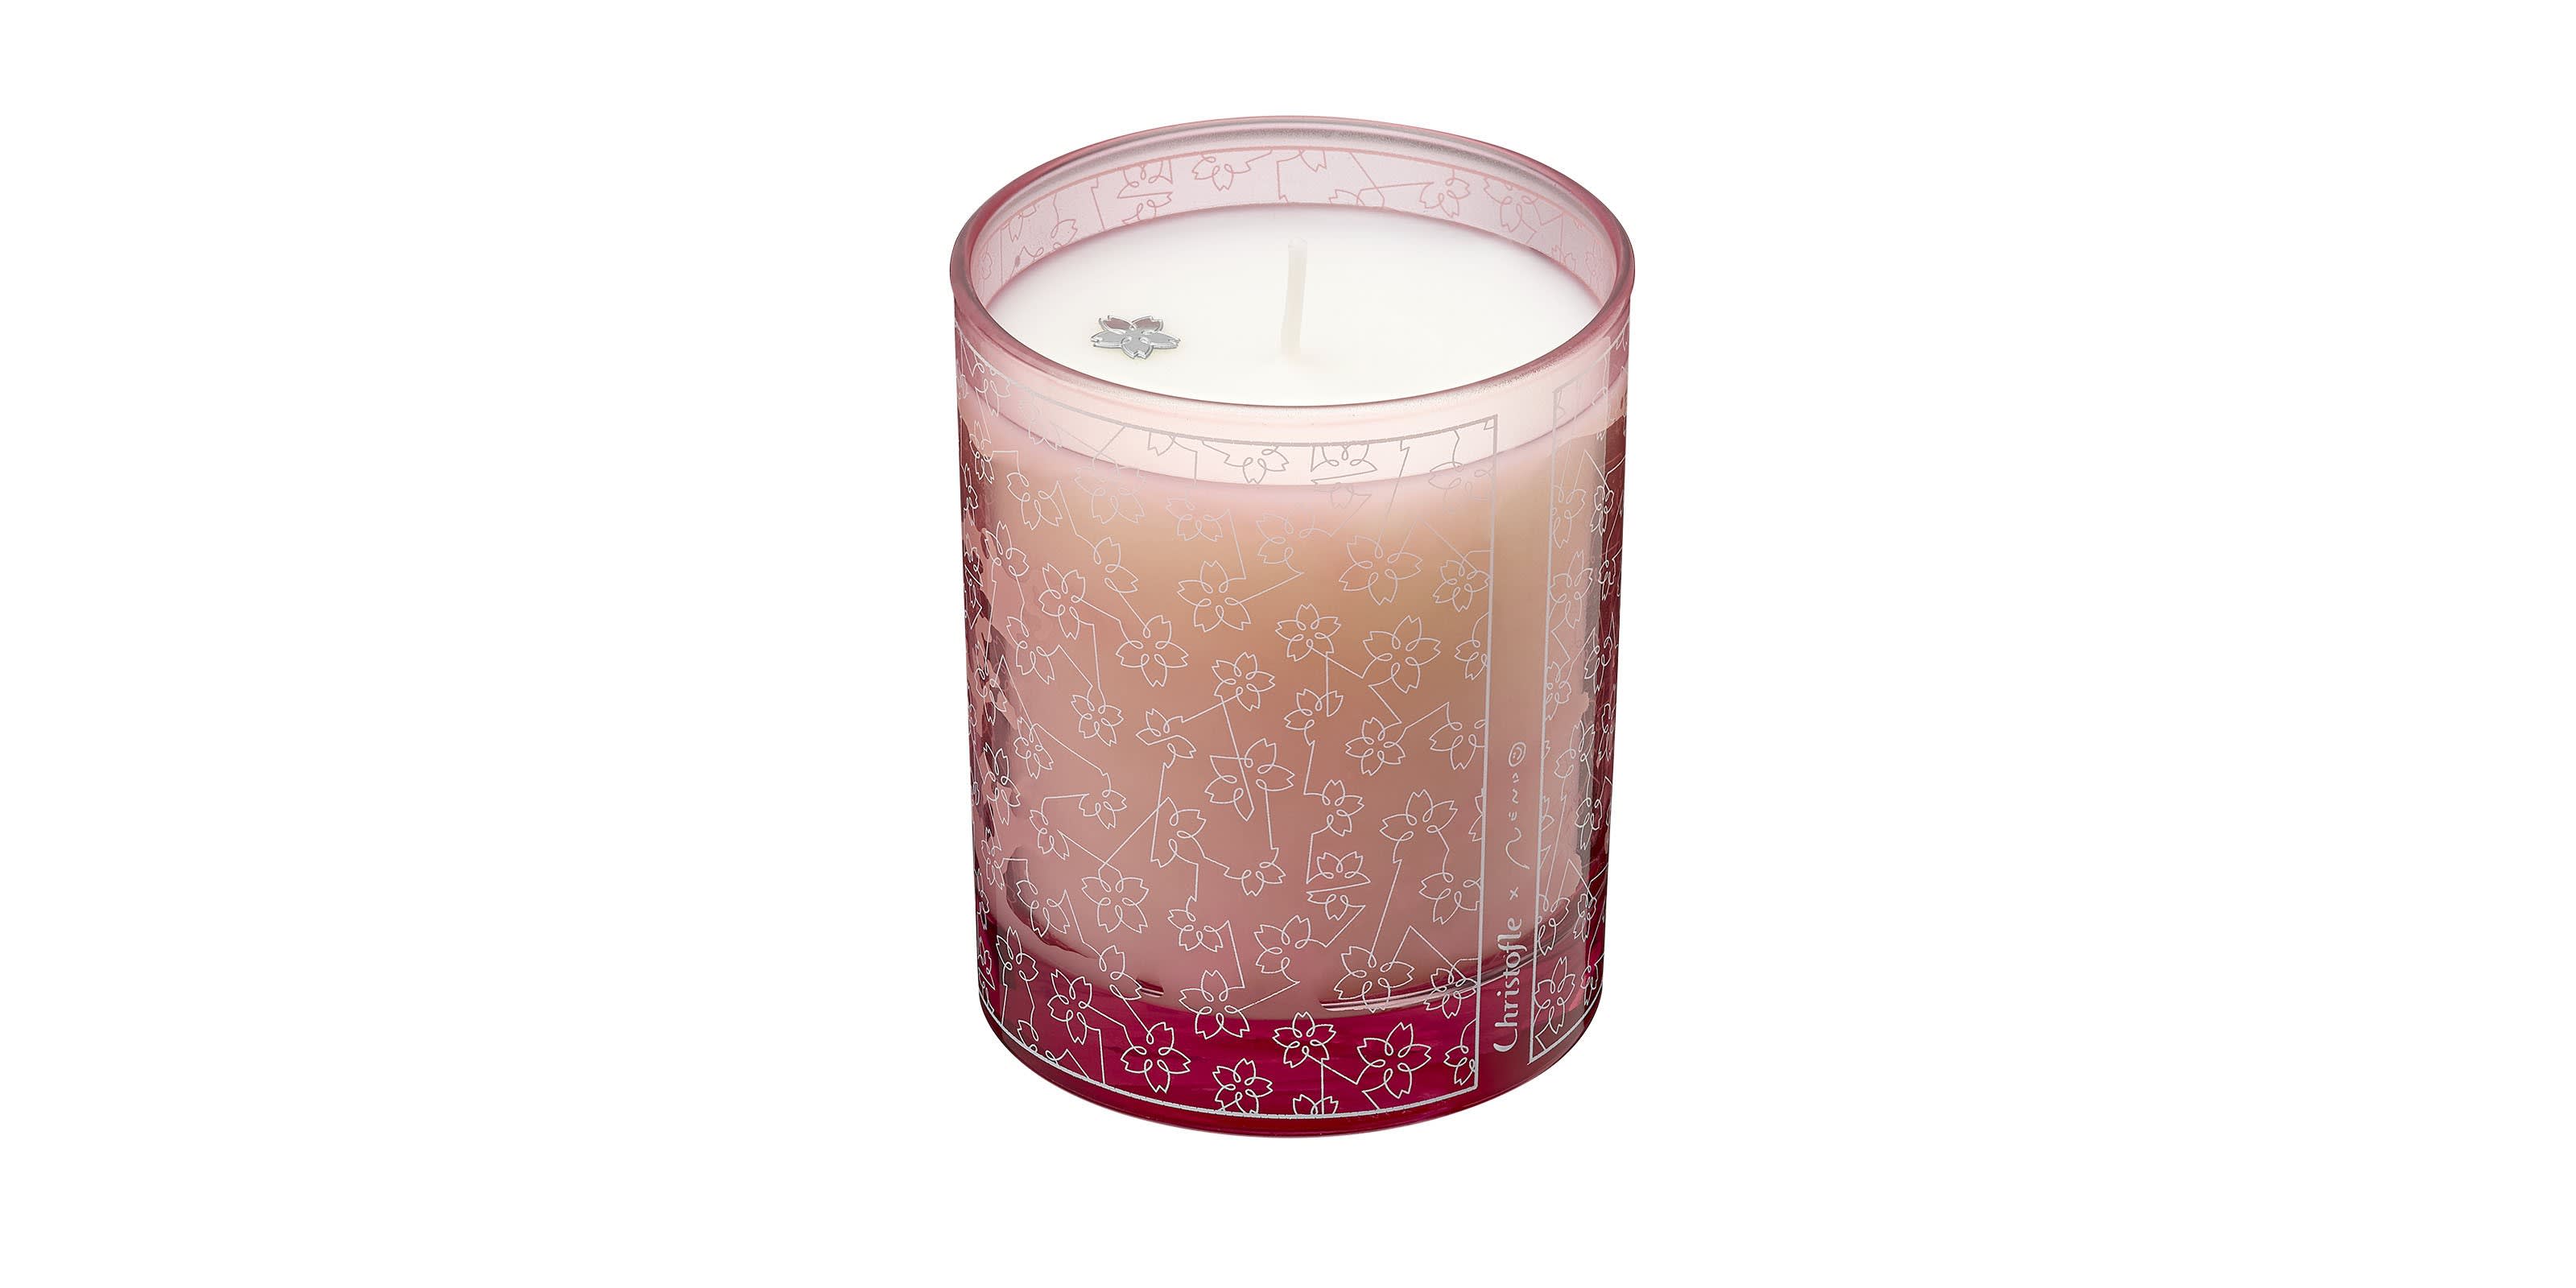  Rose Constellation scented candle